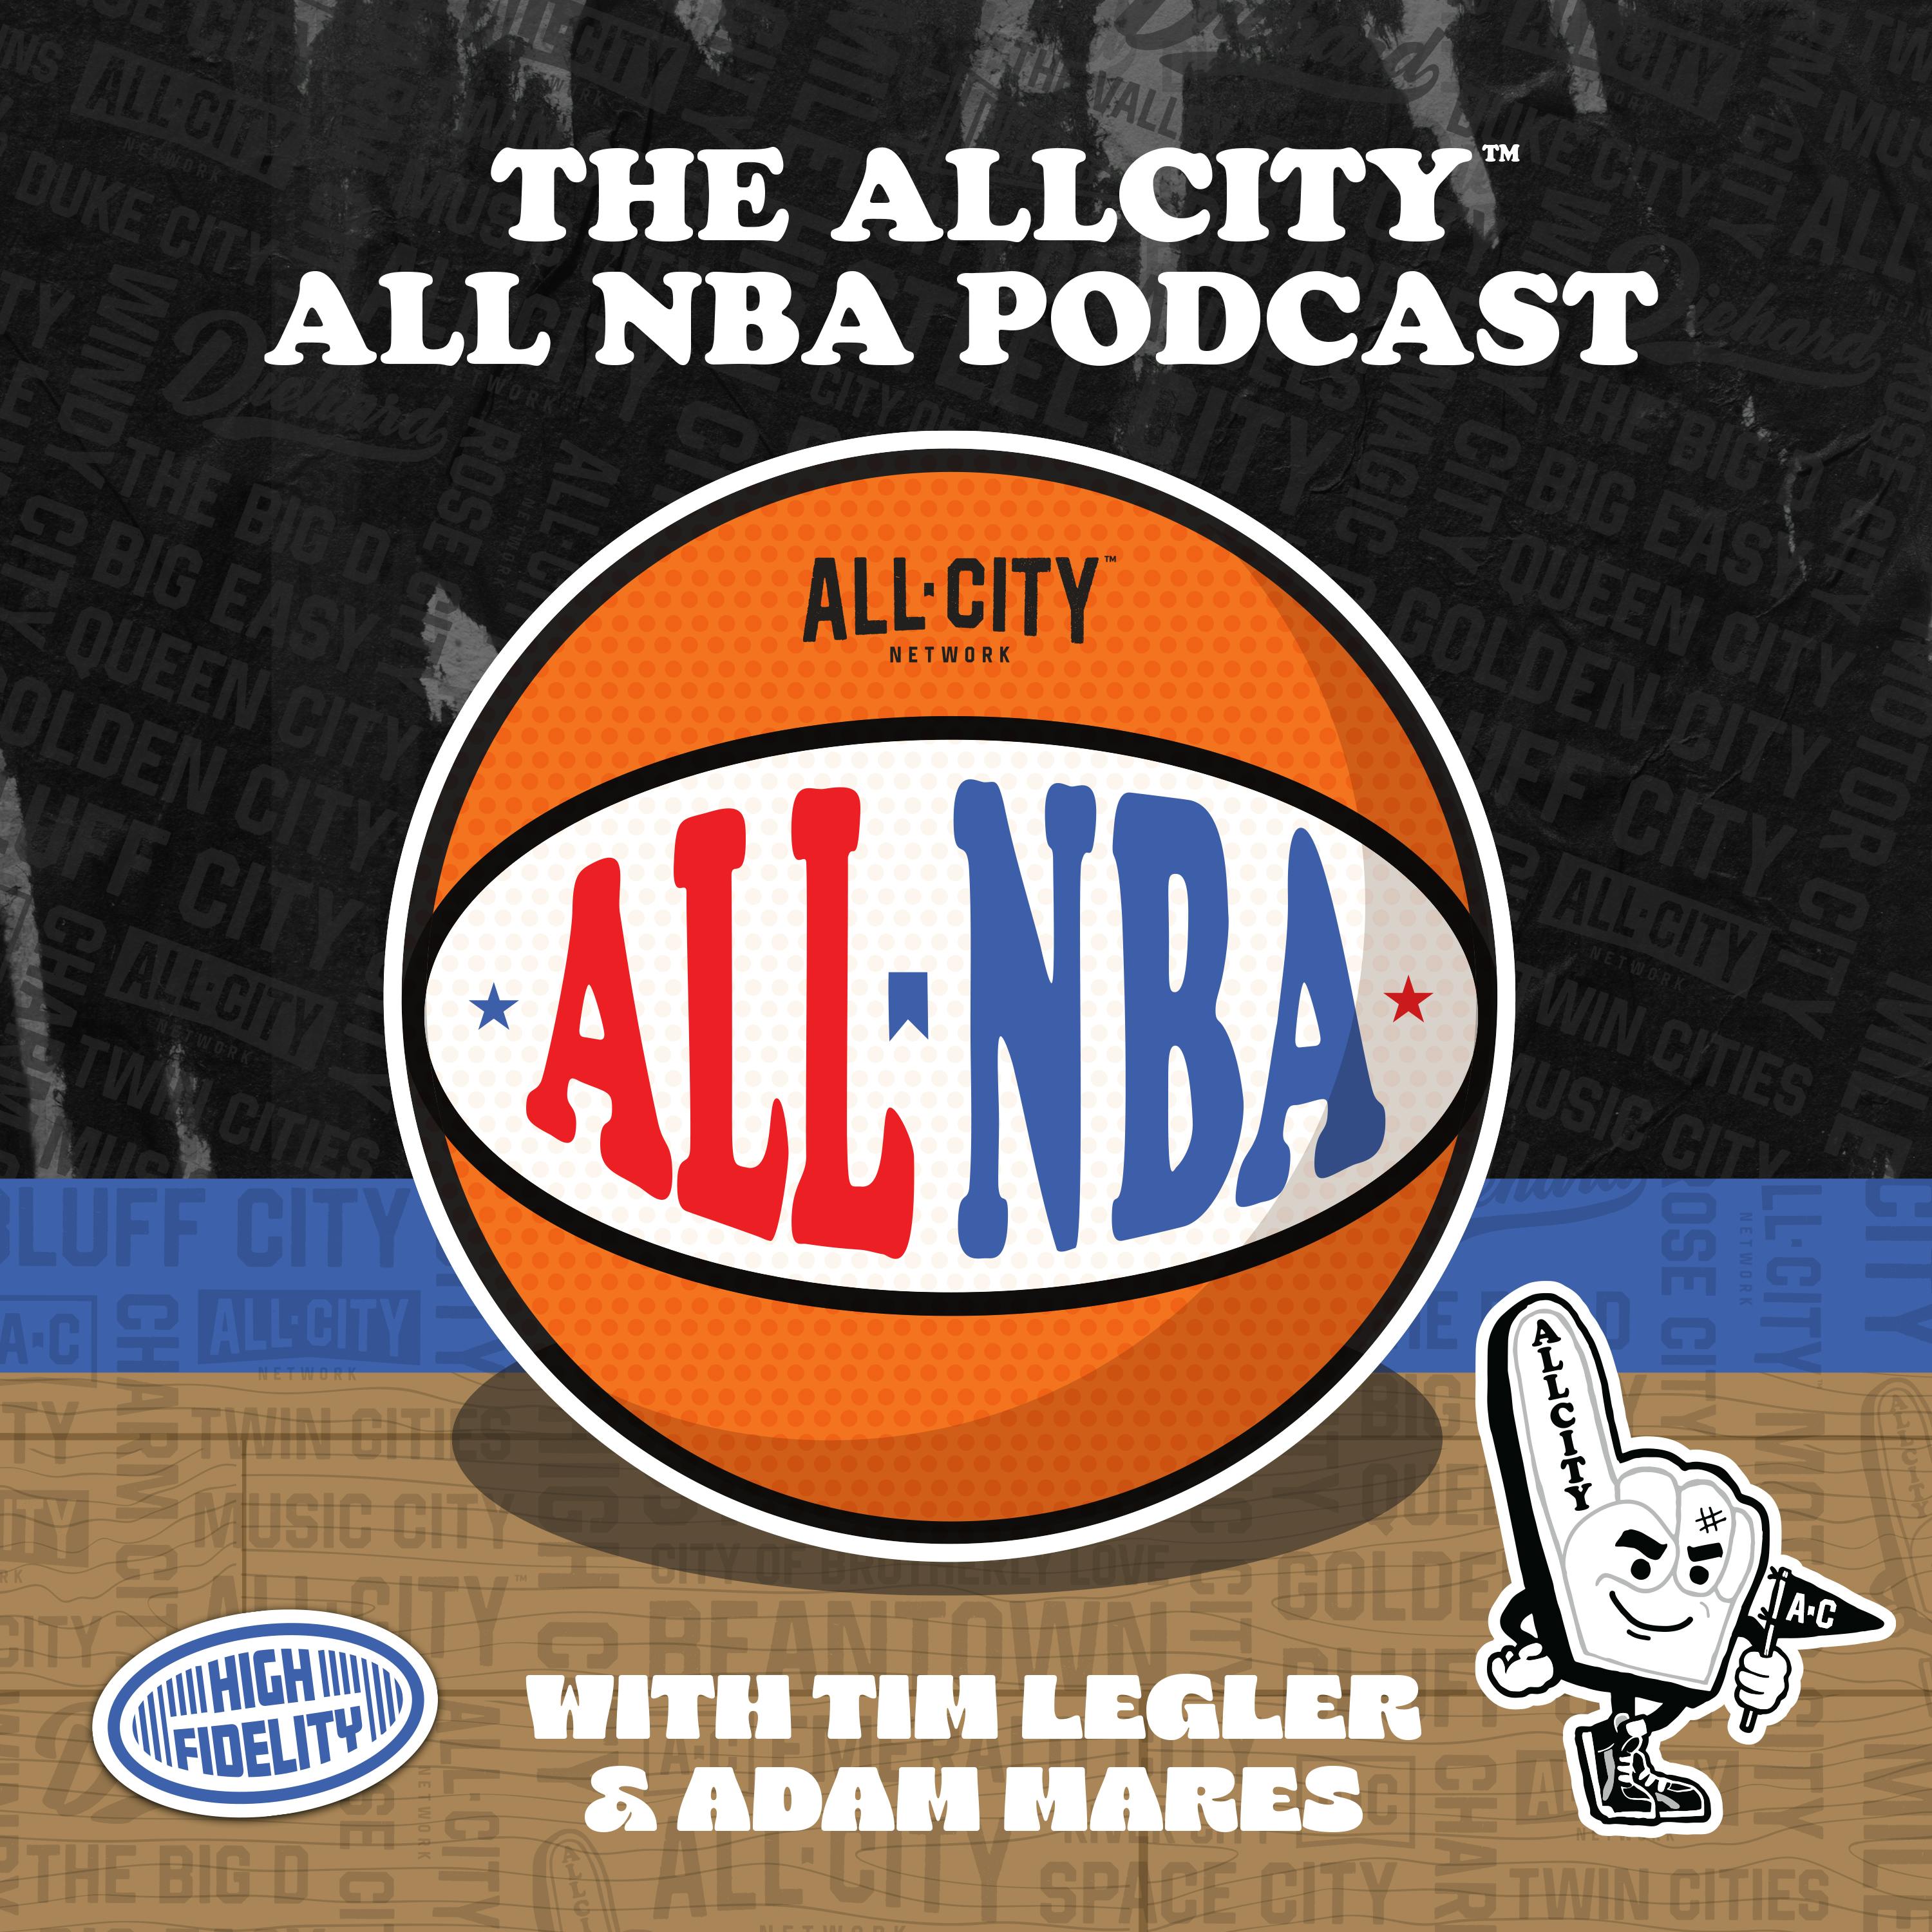 The ALL NBA Podcast: Can Steph Curry and the Warriors still make a cinderella run?